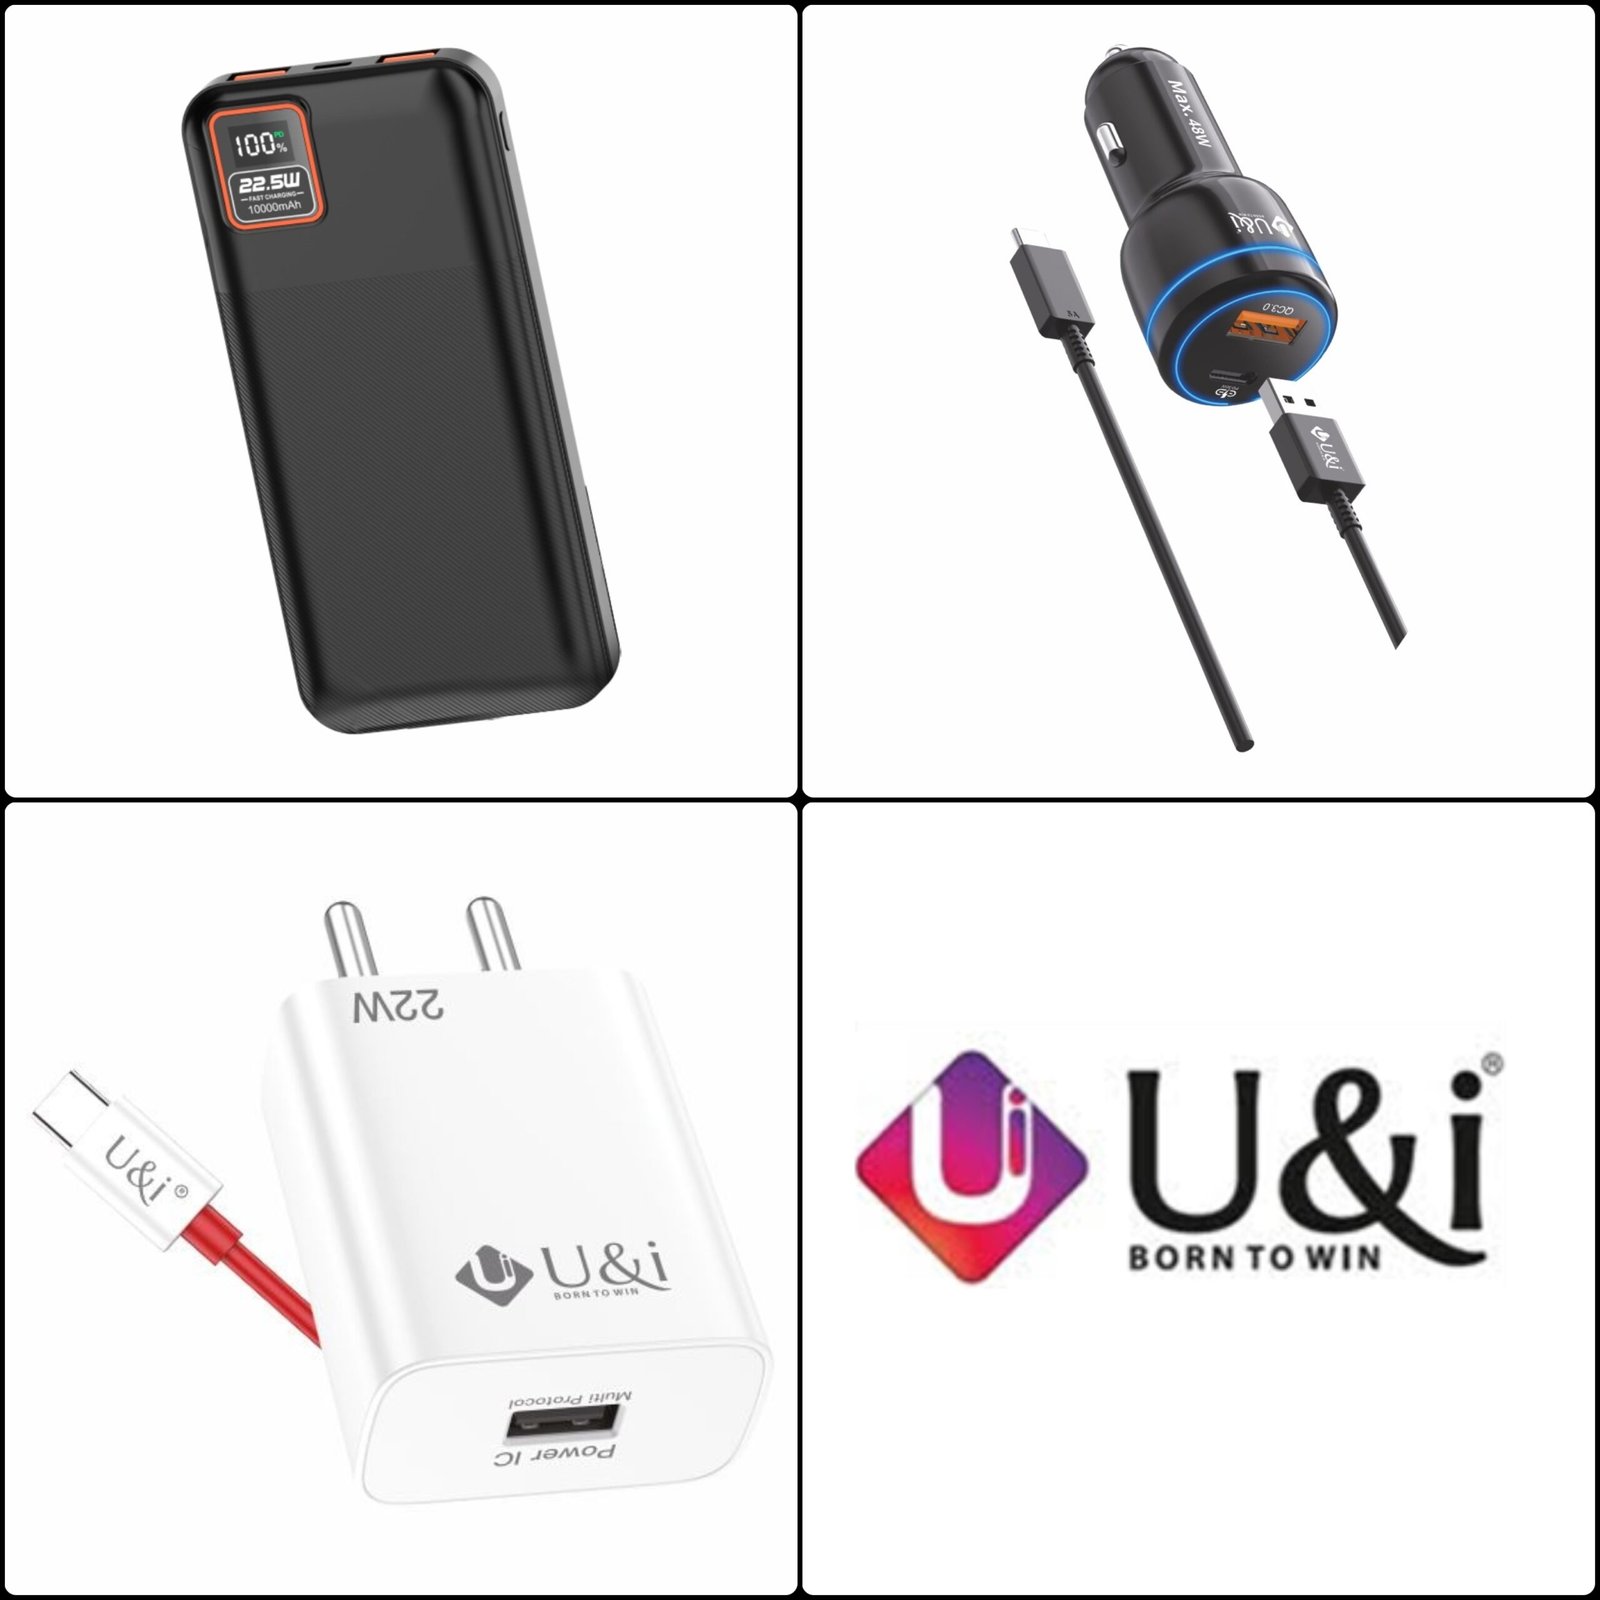 Ui Charging Accessories scaled